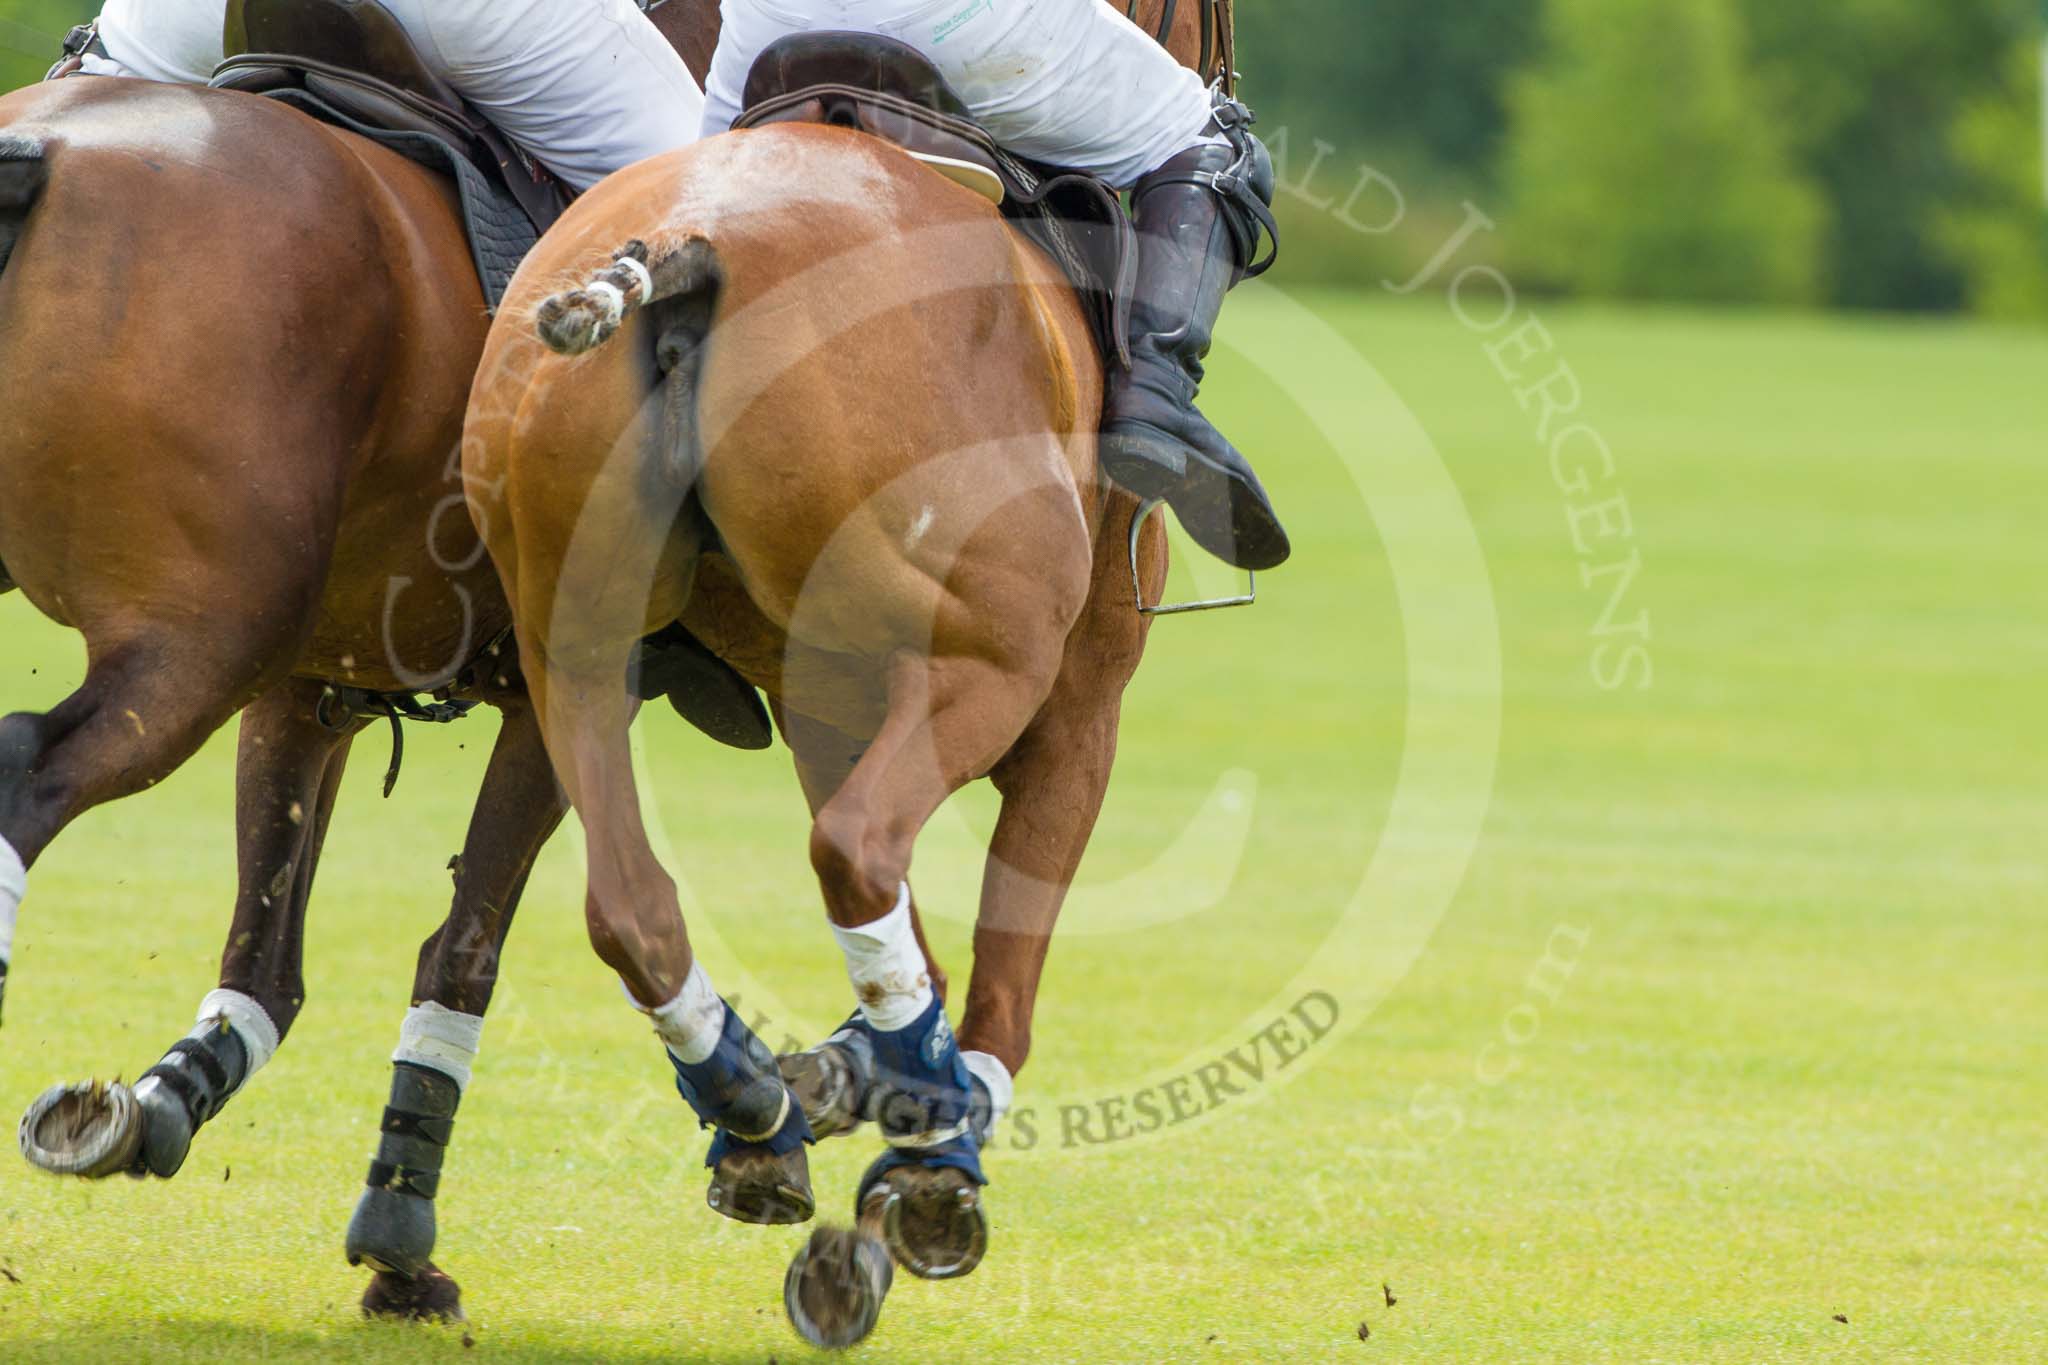 7th Heritage Polo Cup semi-finals: HERITAGE POLO ride off..
Hurtwood Park Polo Club,
Ewhurst Green,
Surrey,
United Kingdom,
on 04 August 2012 at 11:11, image #26